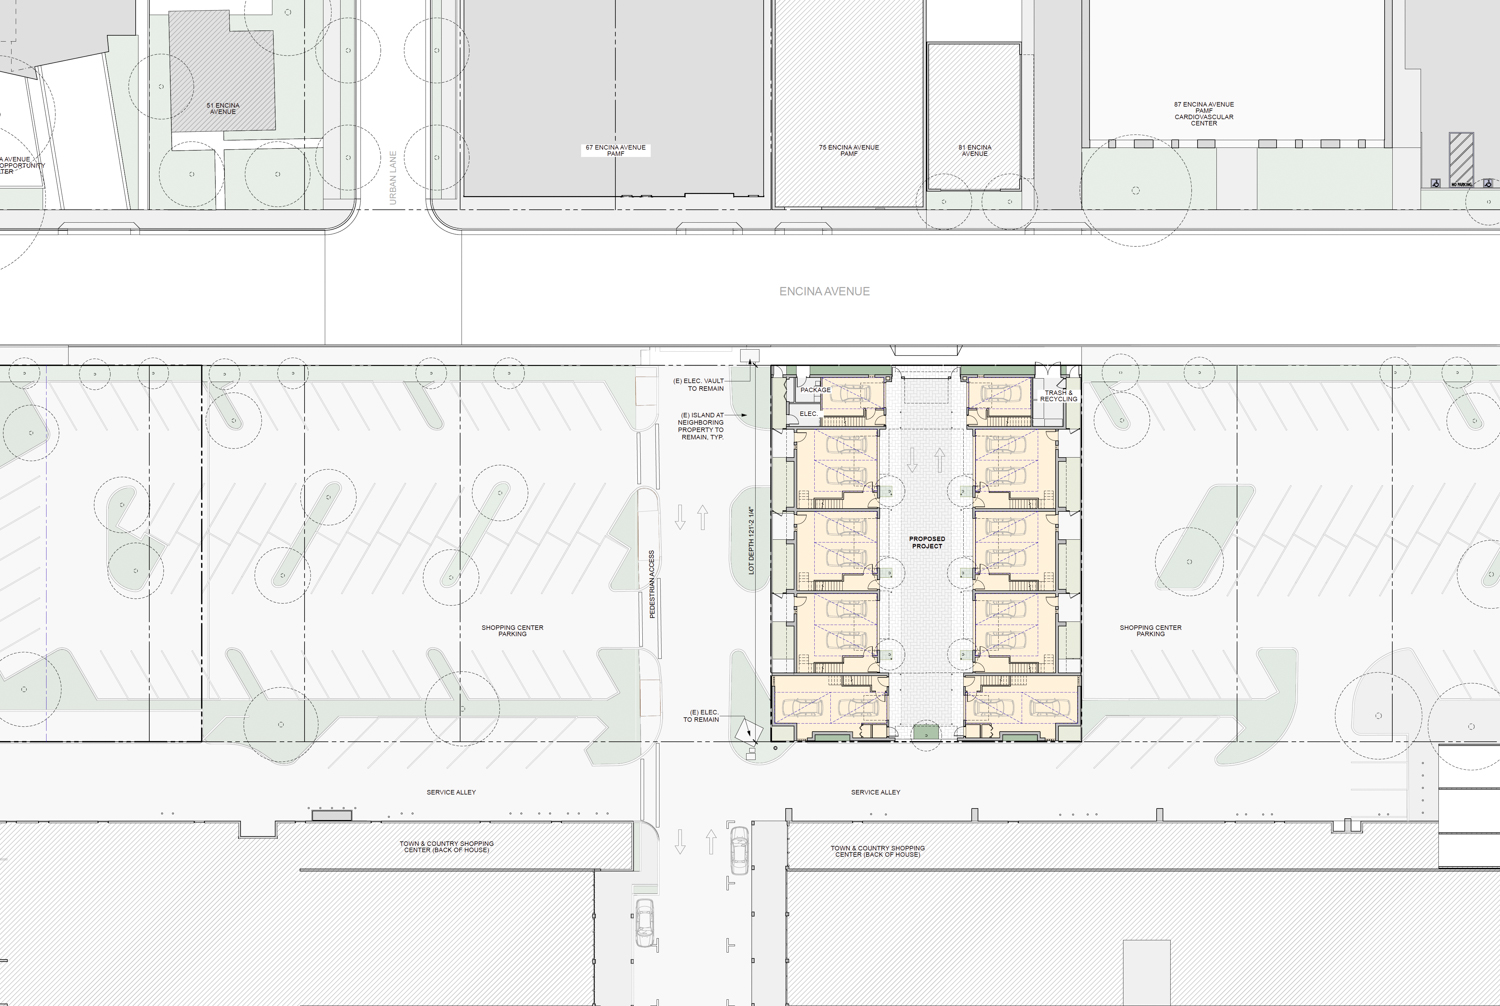 70 Encina Avenue site map, illustration by Hayes Group Architects